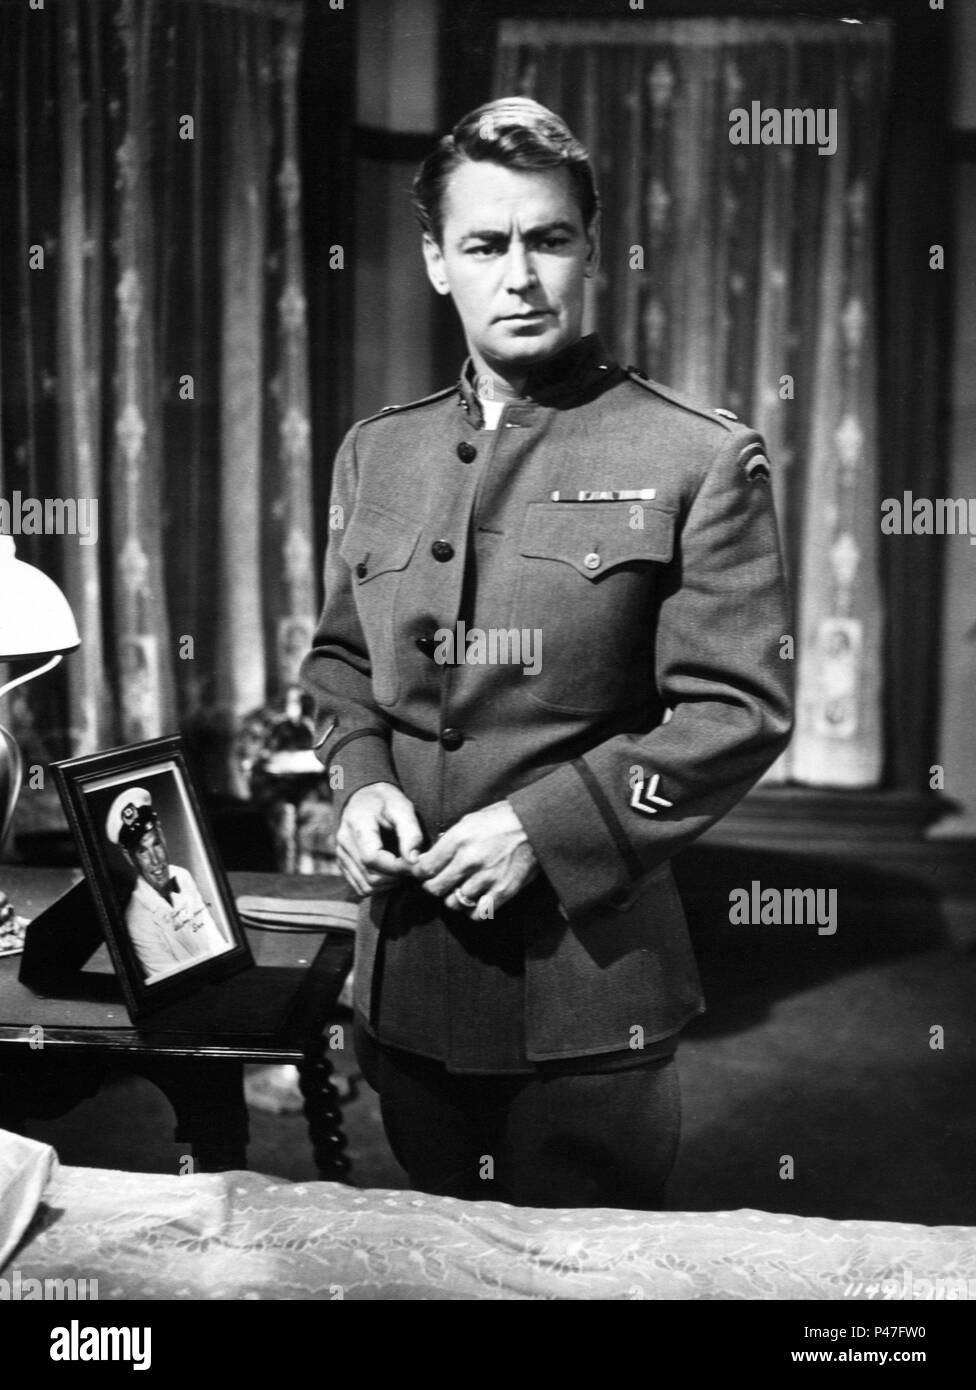 The great gatsby 1949 alan ladd Black and White Stock Photos & Images ...